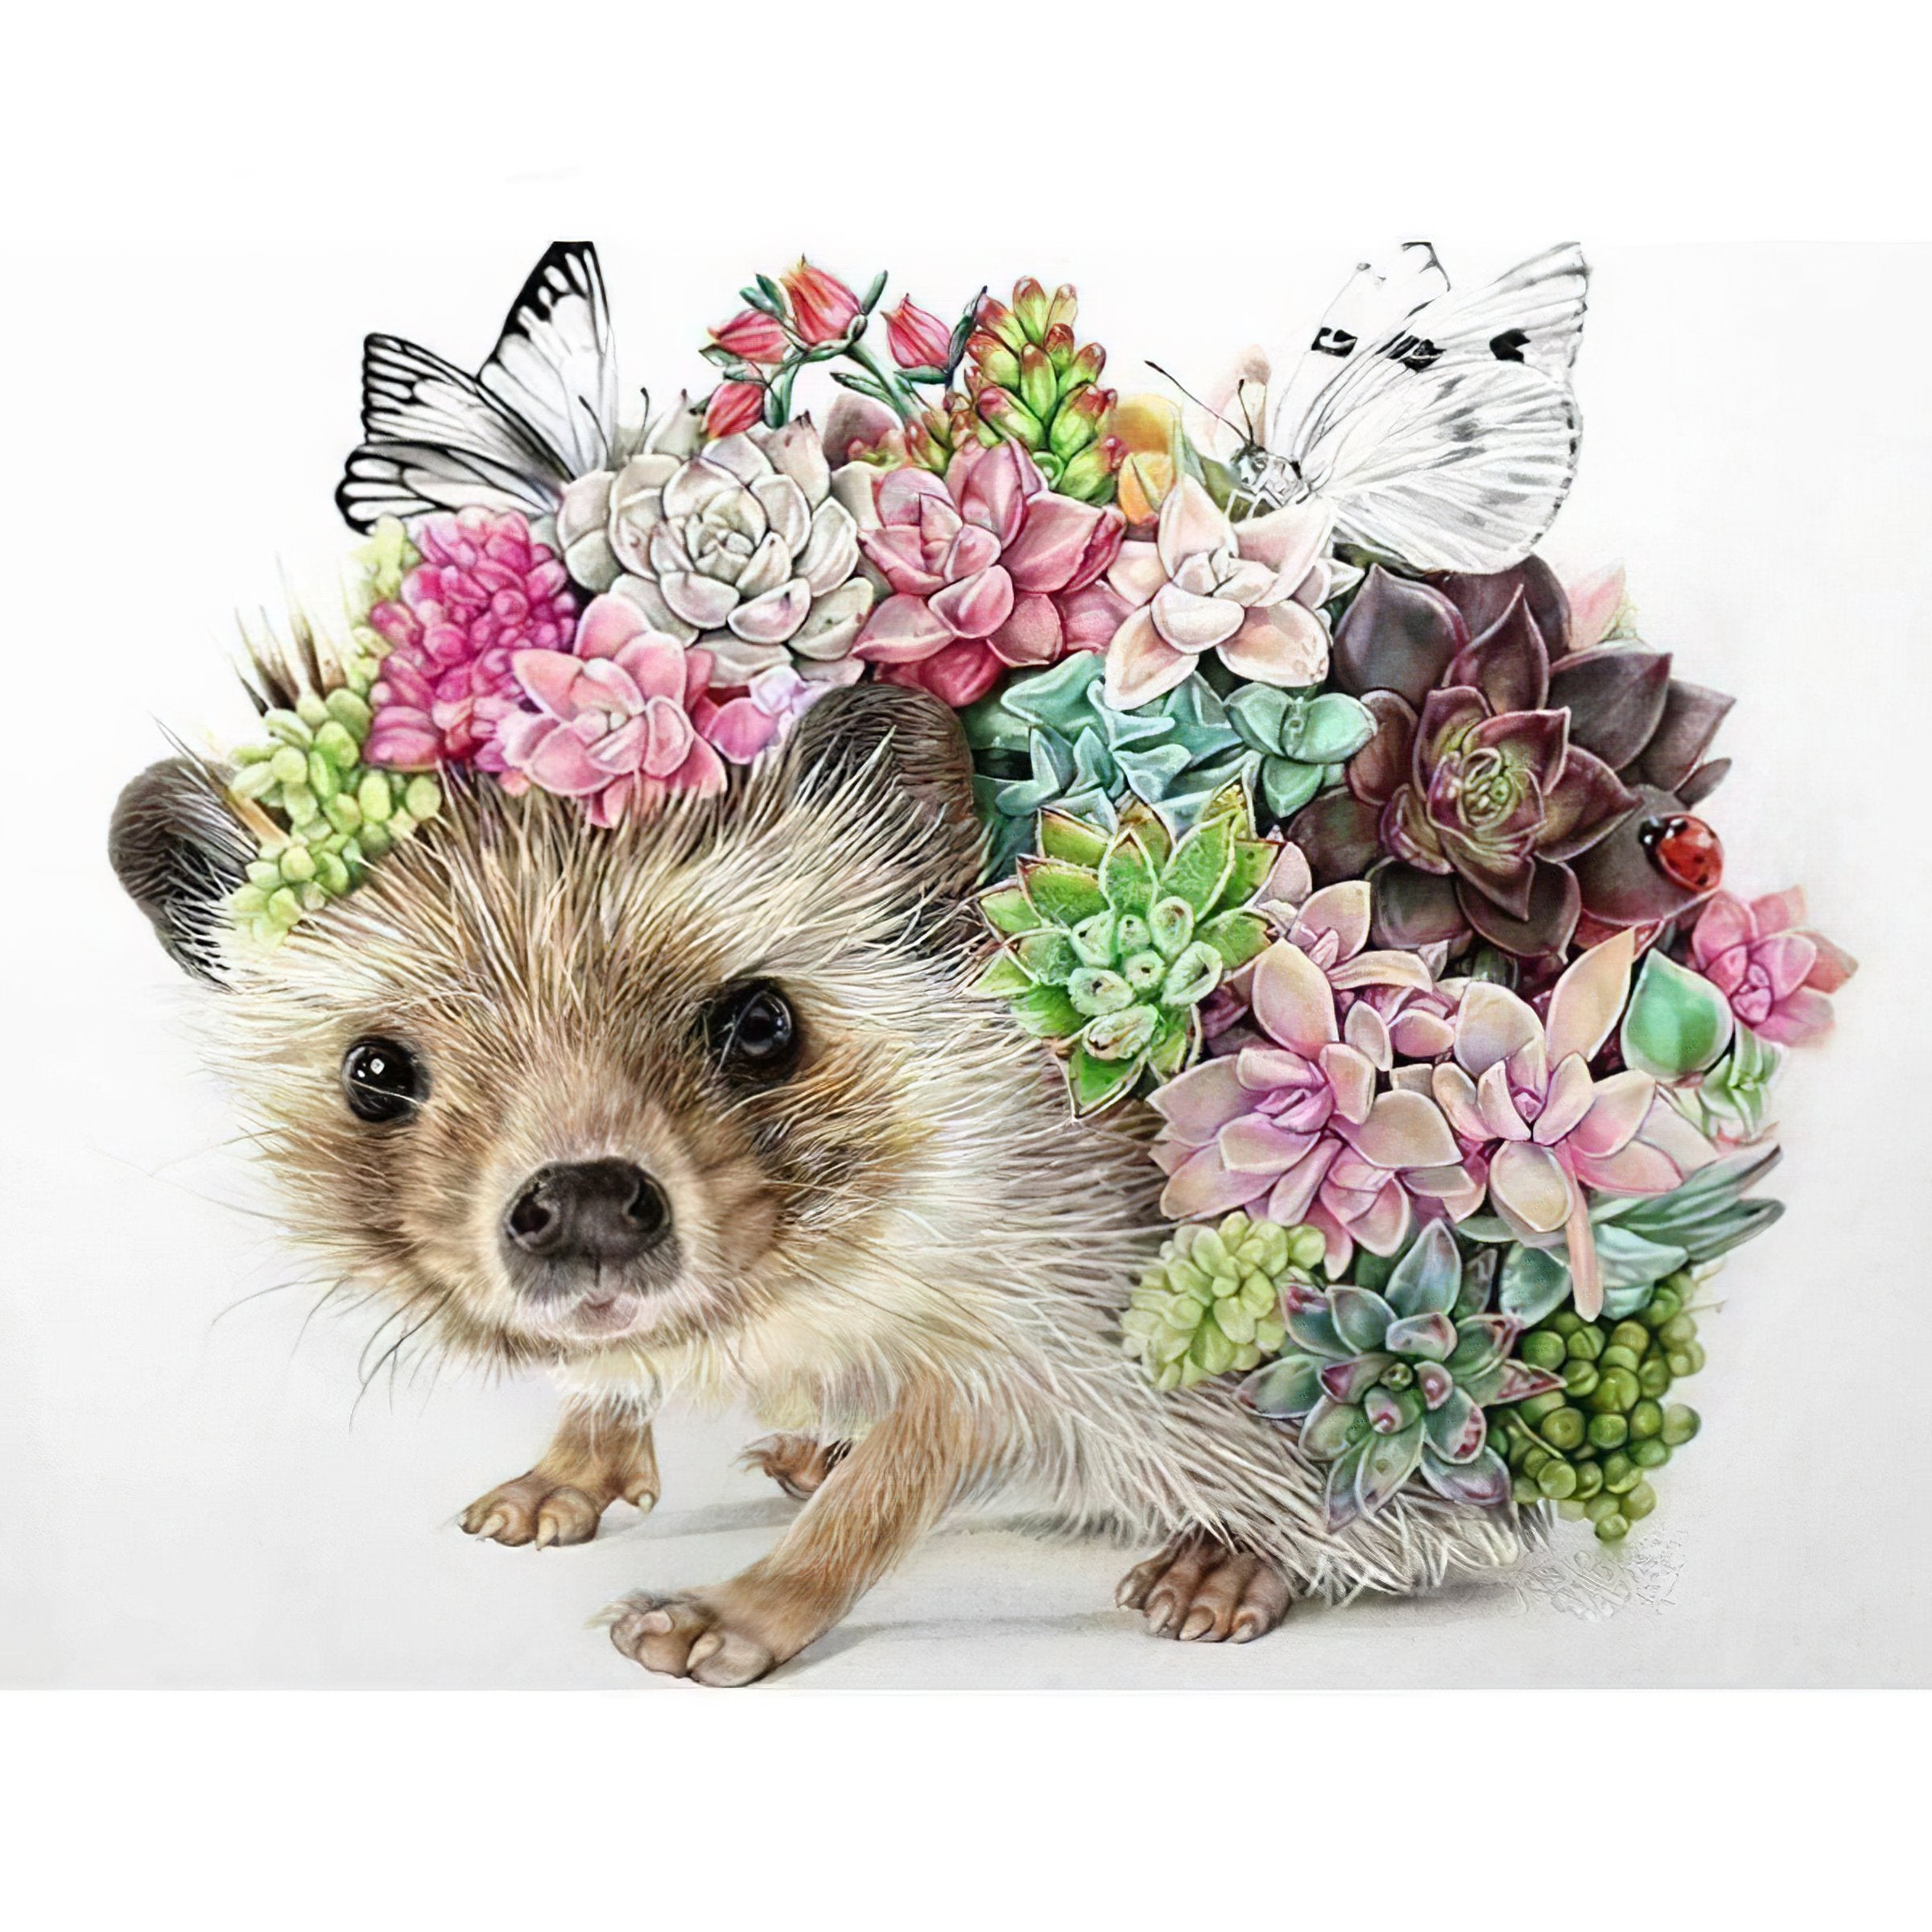 Delight in the cuteness of a Hedgehog in colorful detail.Hedgehog - Diamondartlove